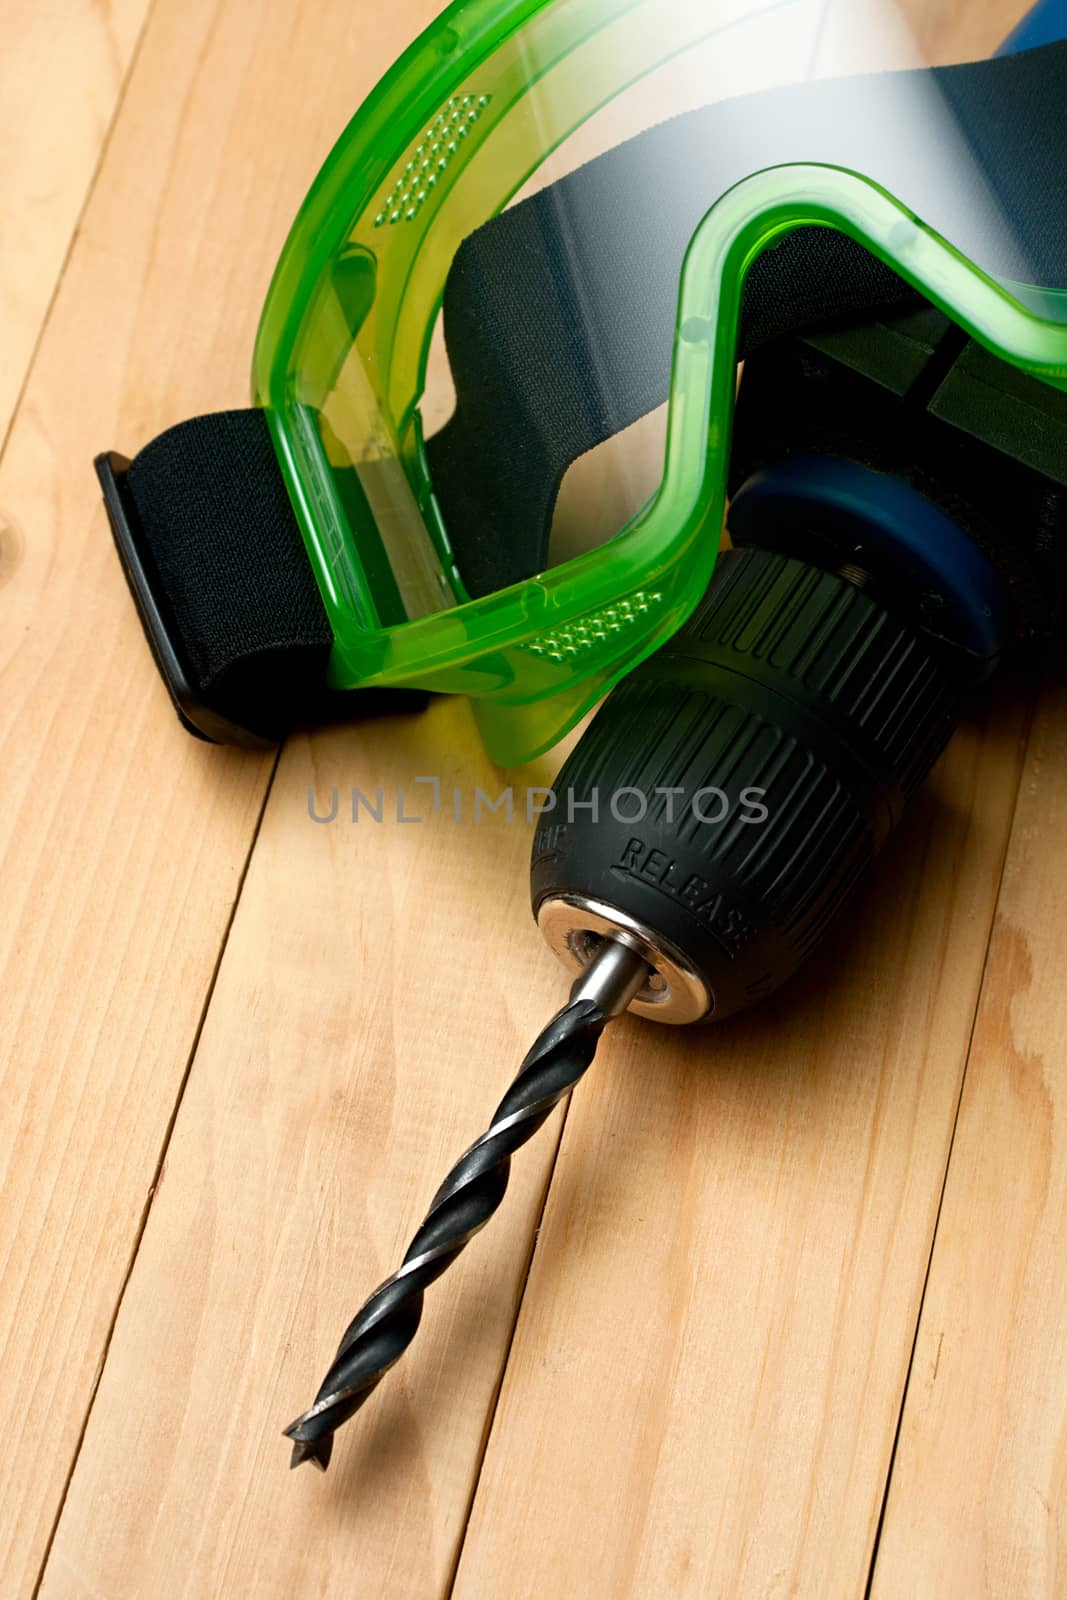 Handdrill and goggles on wooden background